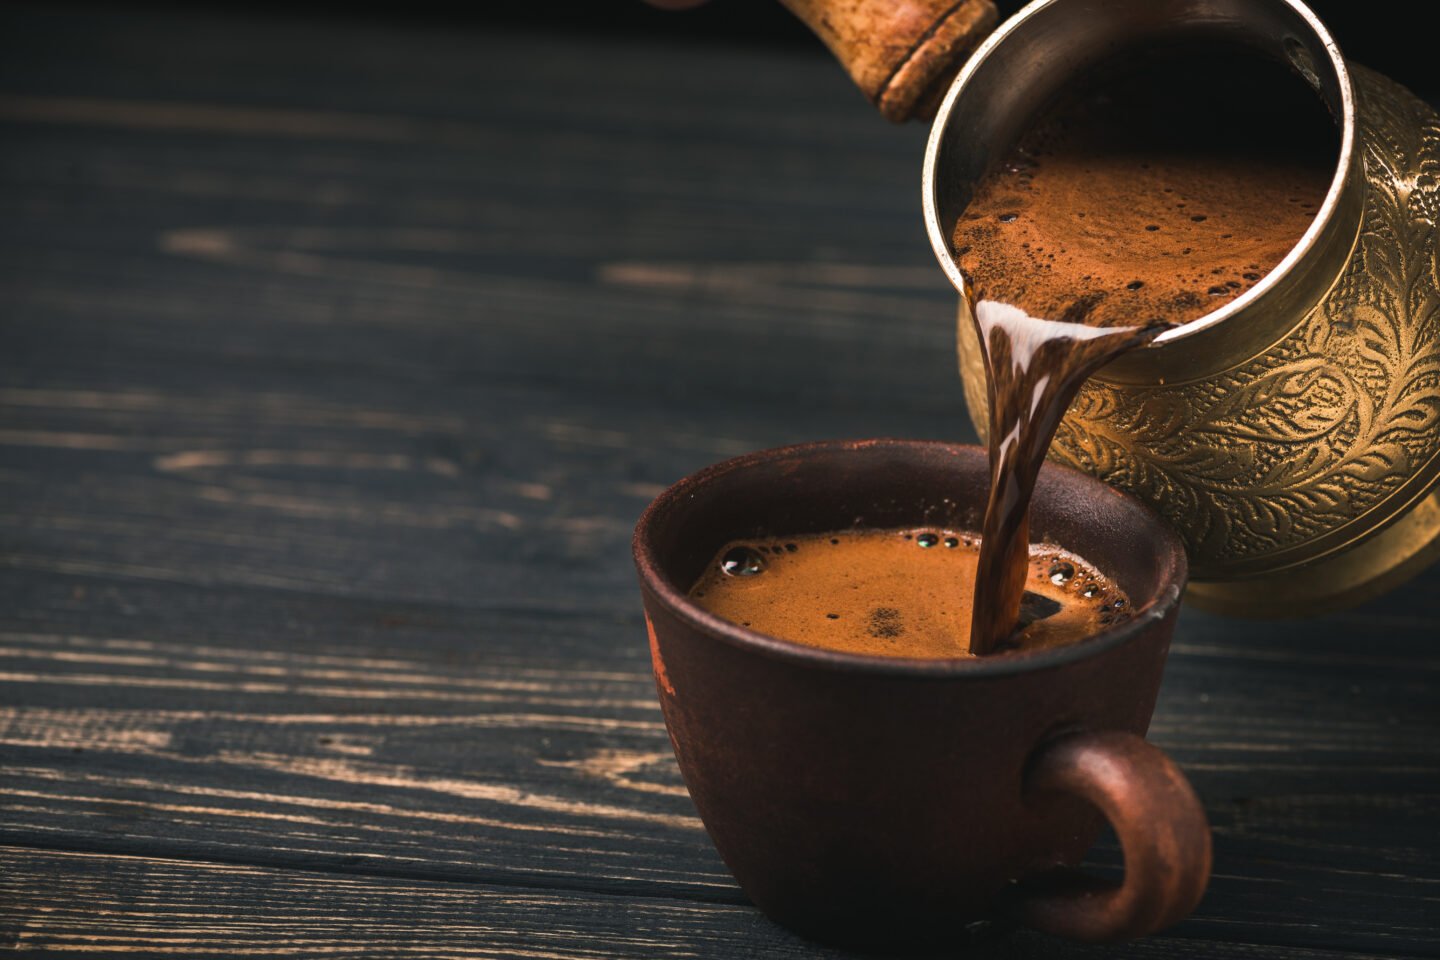 pouring-turkish-coffee-into-vintage-cup-on-wooden-background